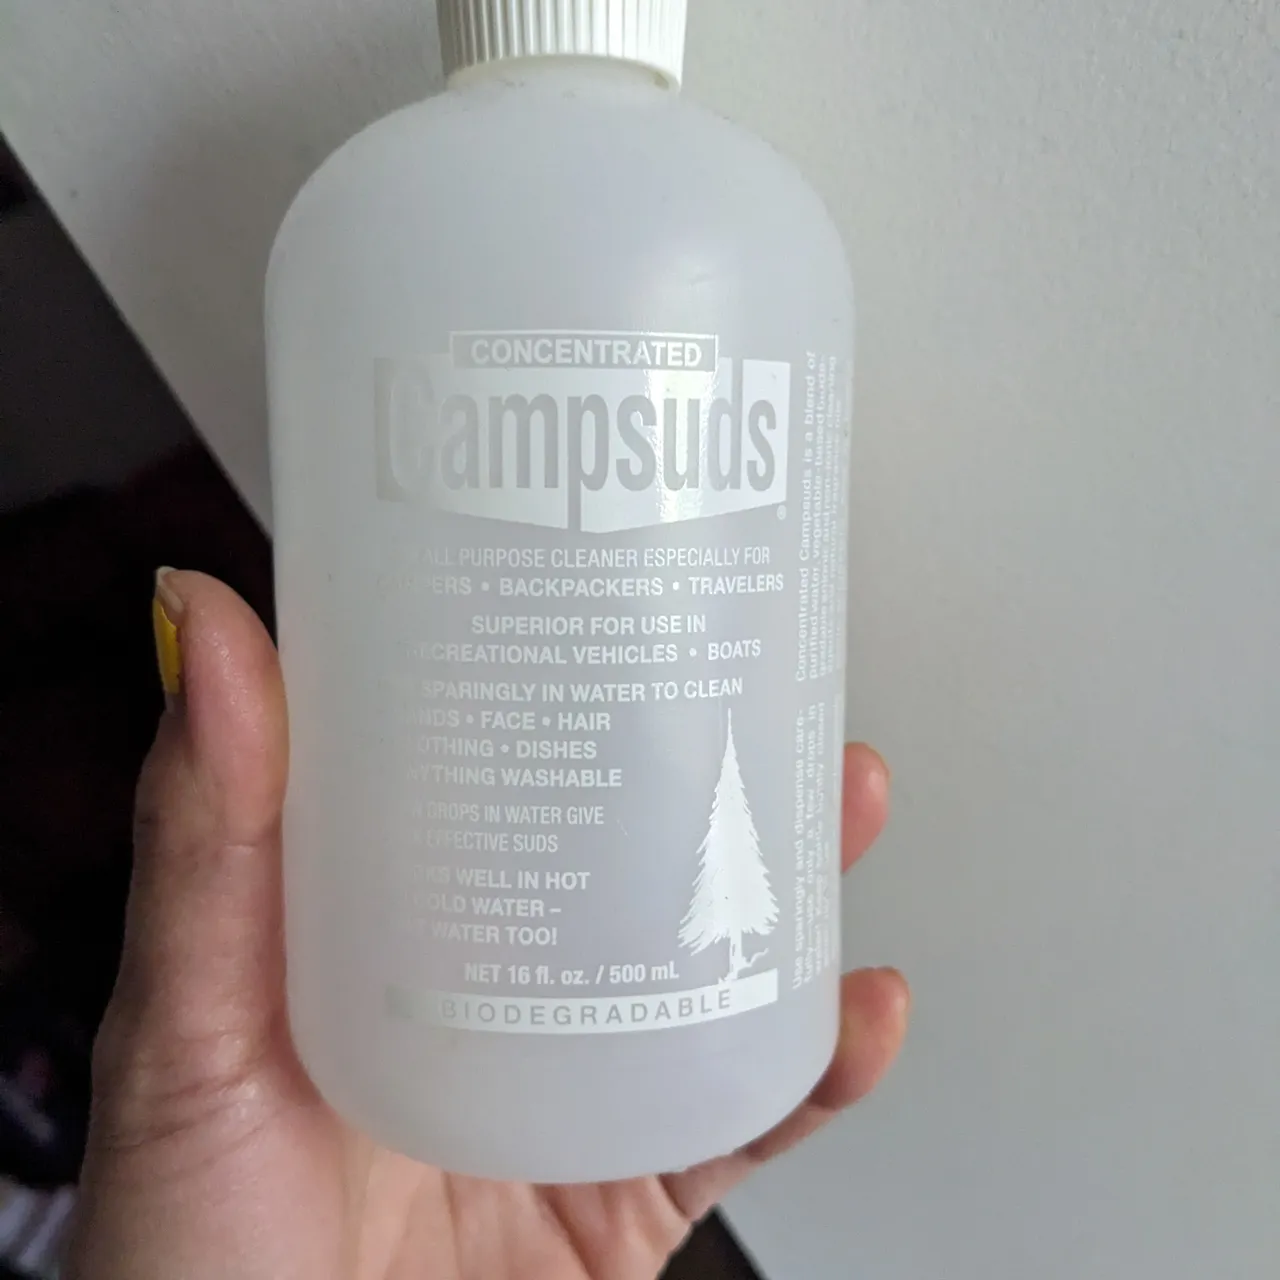 FREE Campsuds: empty bottle photo 1